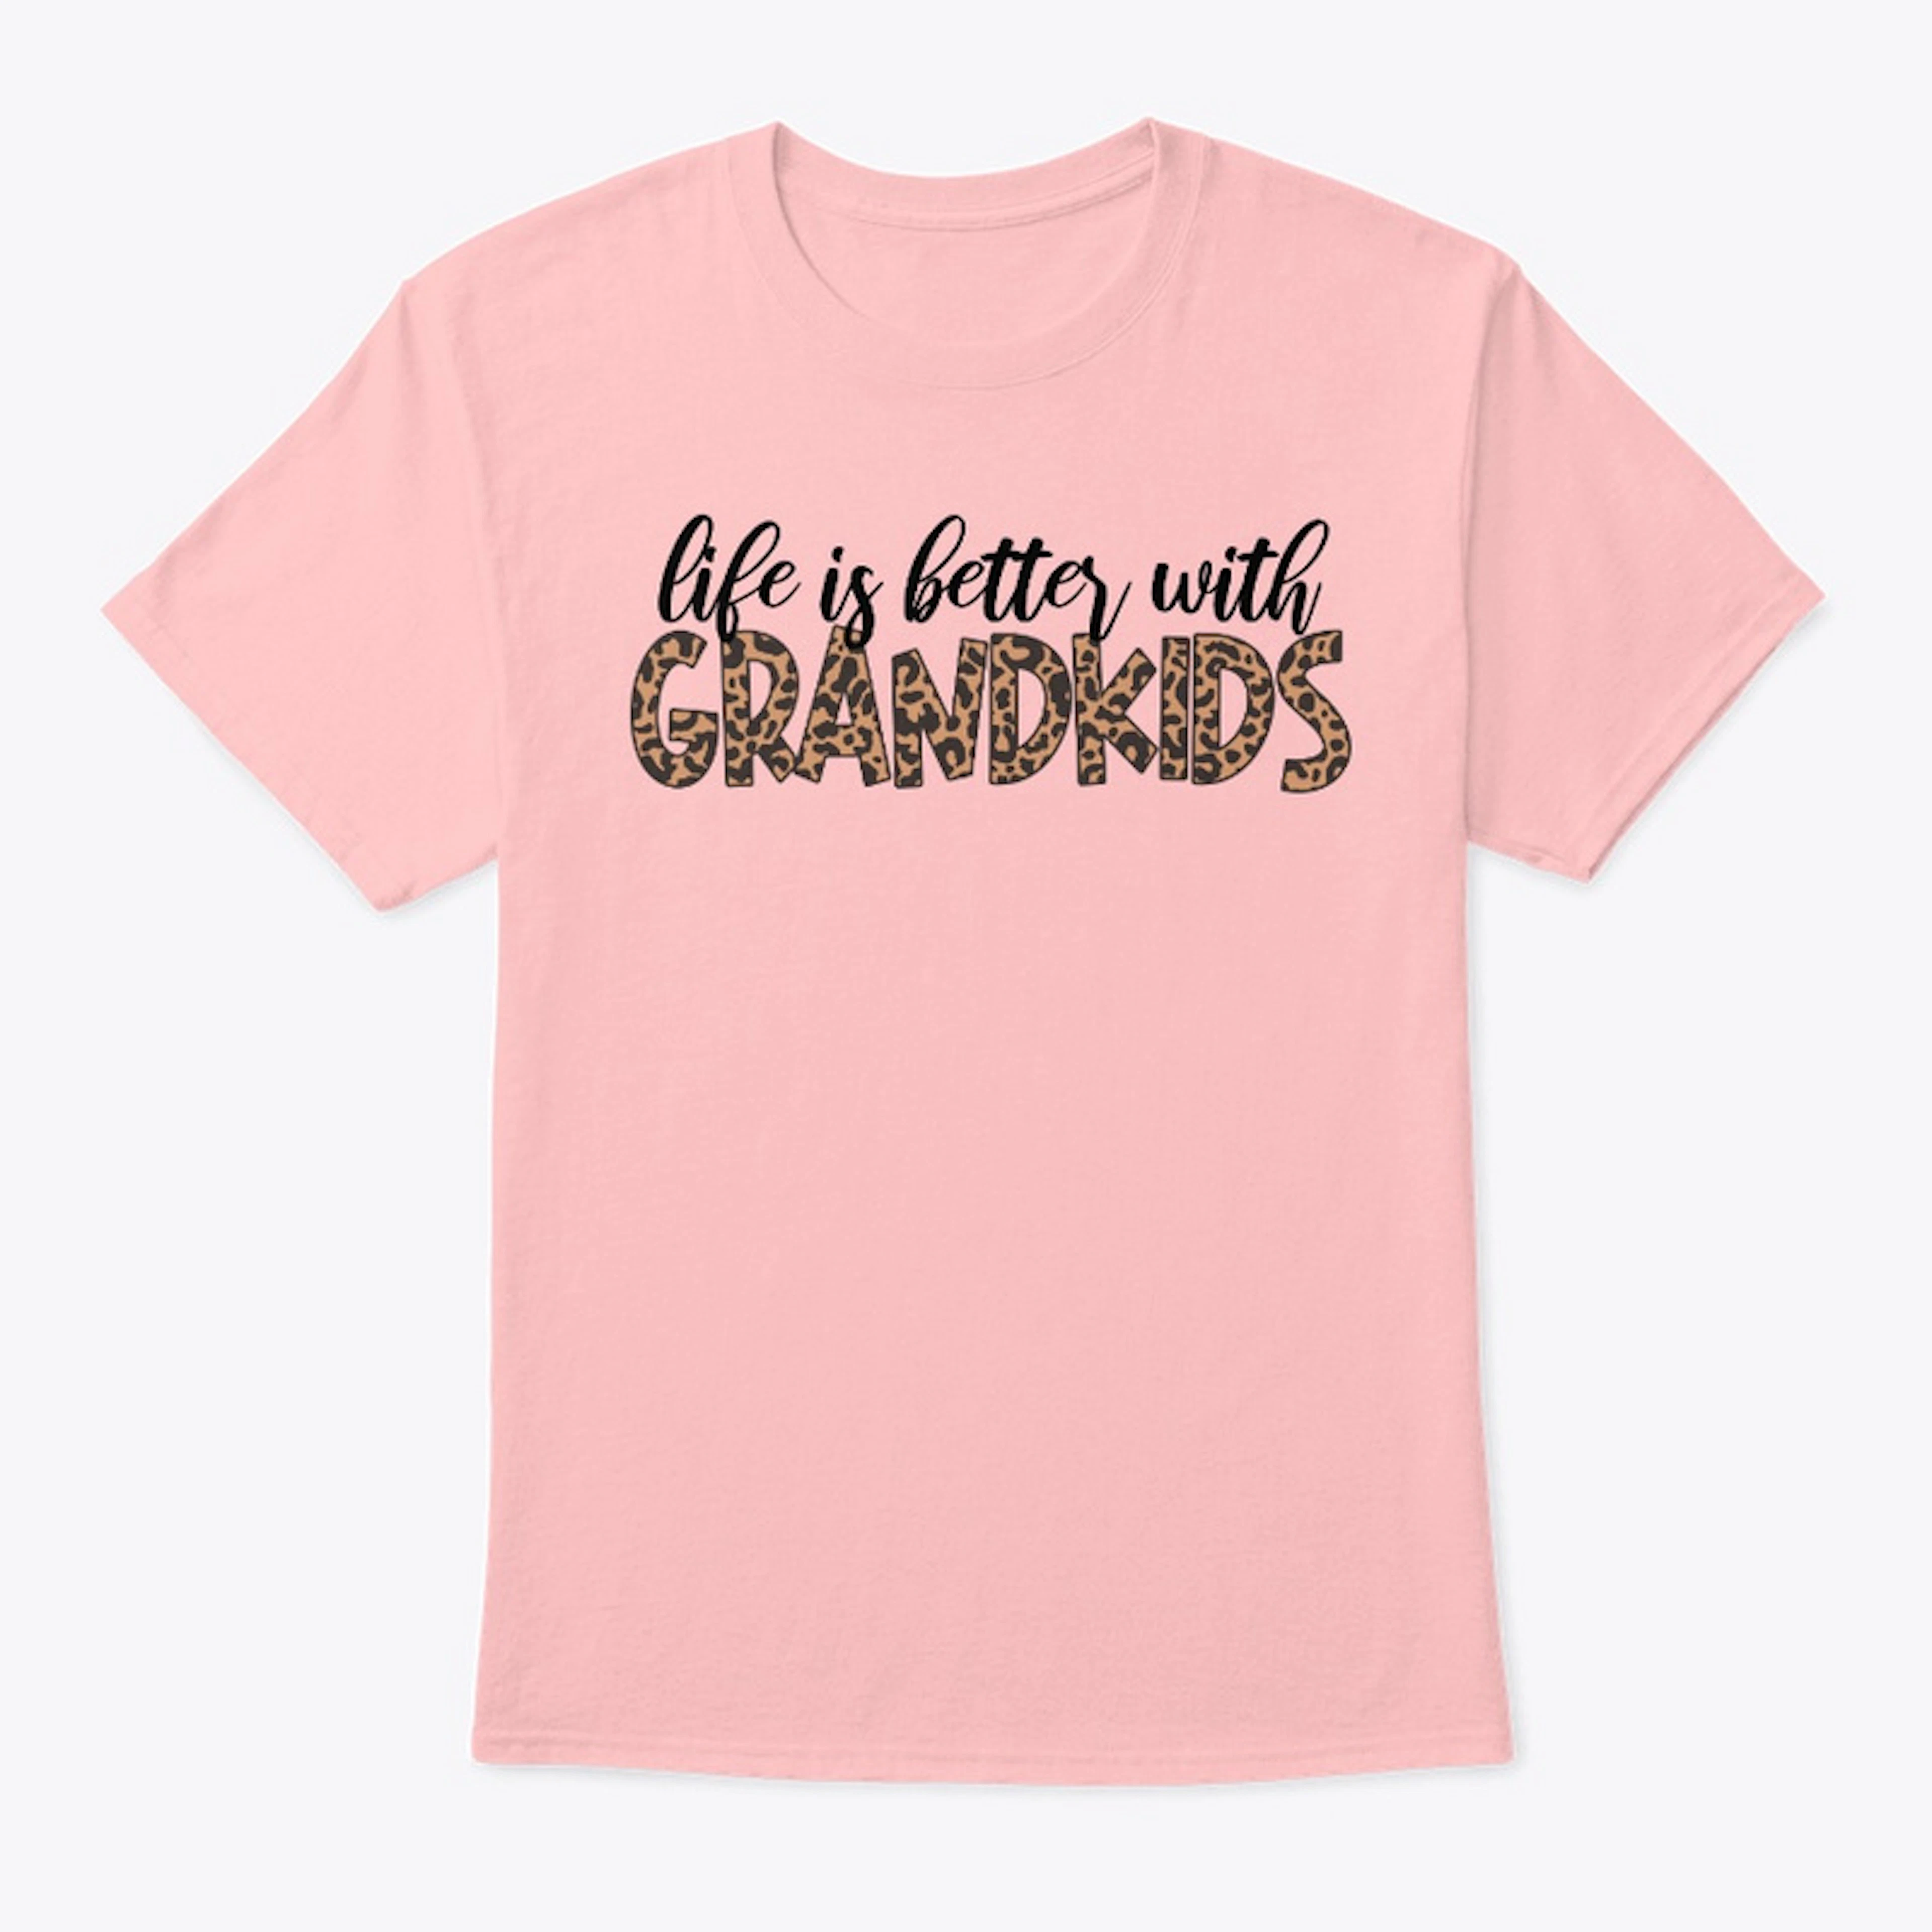 Life is better with GRANDKIDS